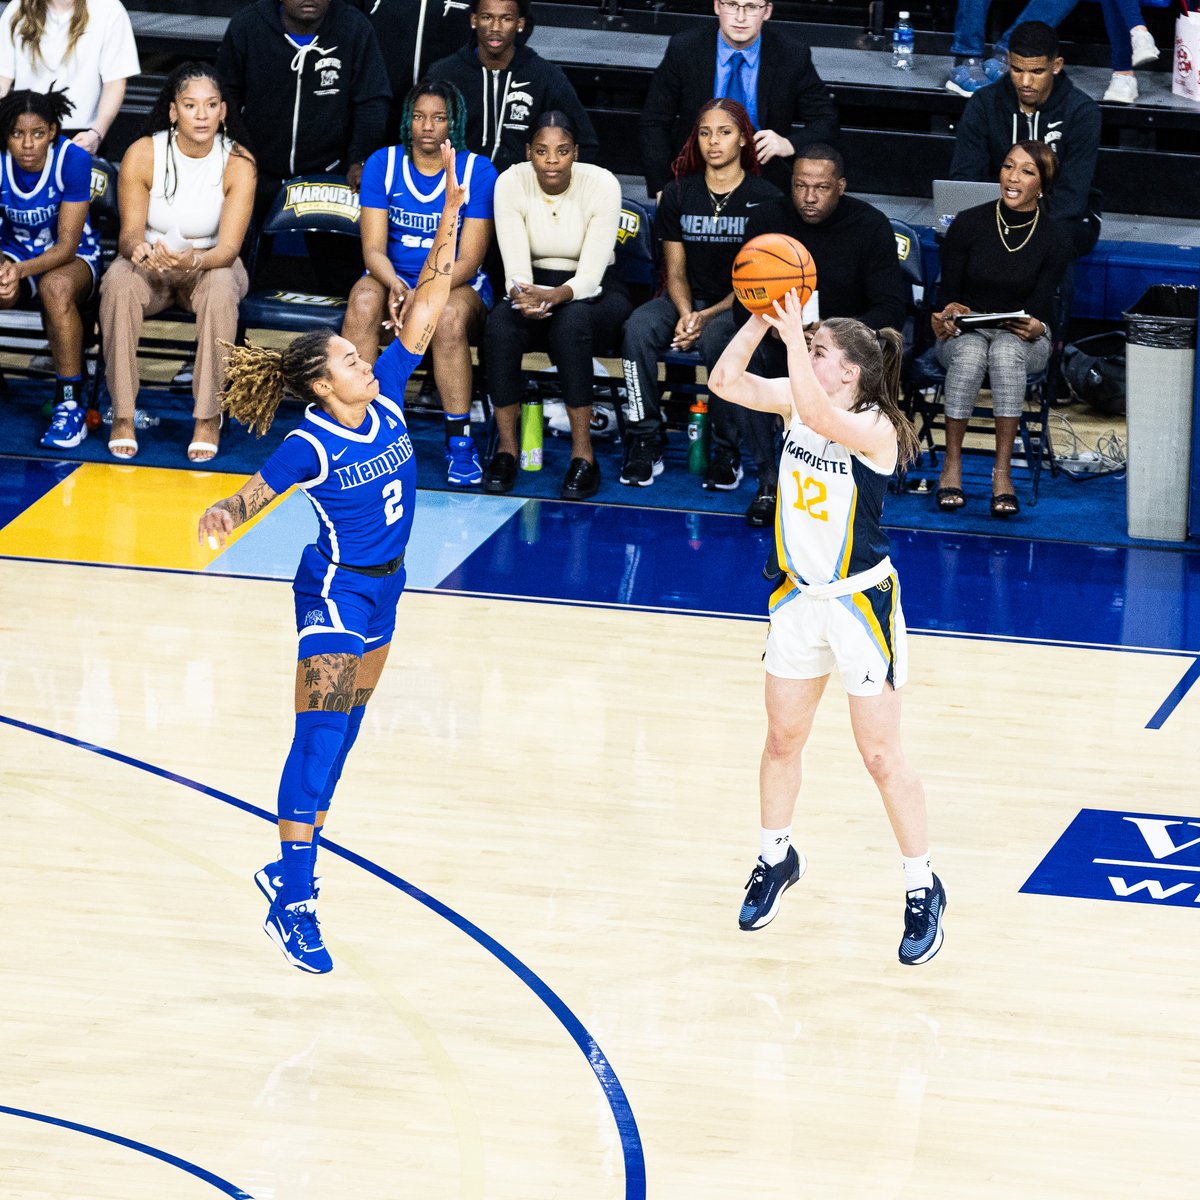 Sophomore guard Kenzie Hare scored 17 points in Marquettes 88-59 win over Memphis. (Photo courtesy of Marquette Athletics.)